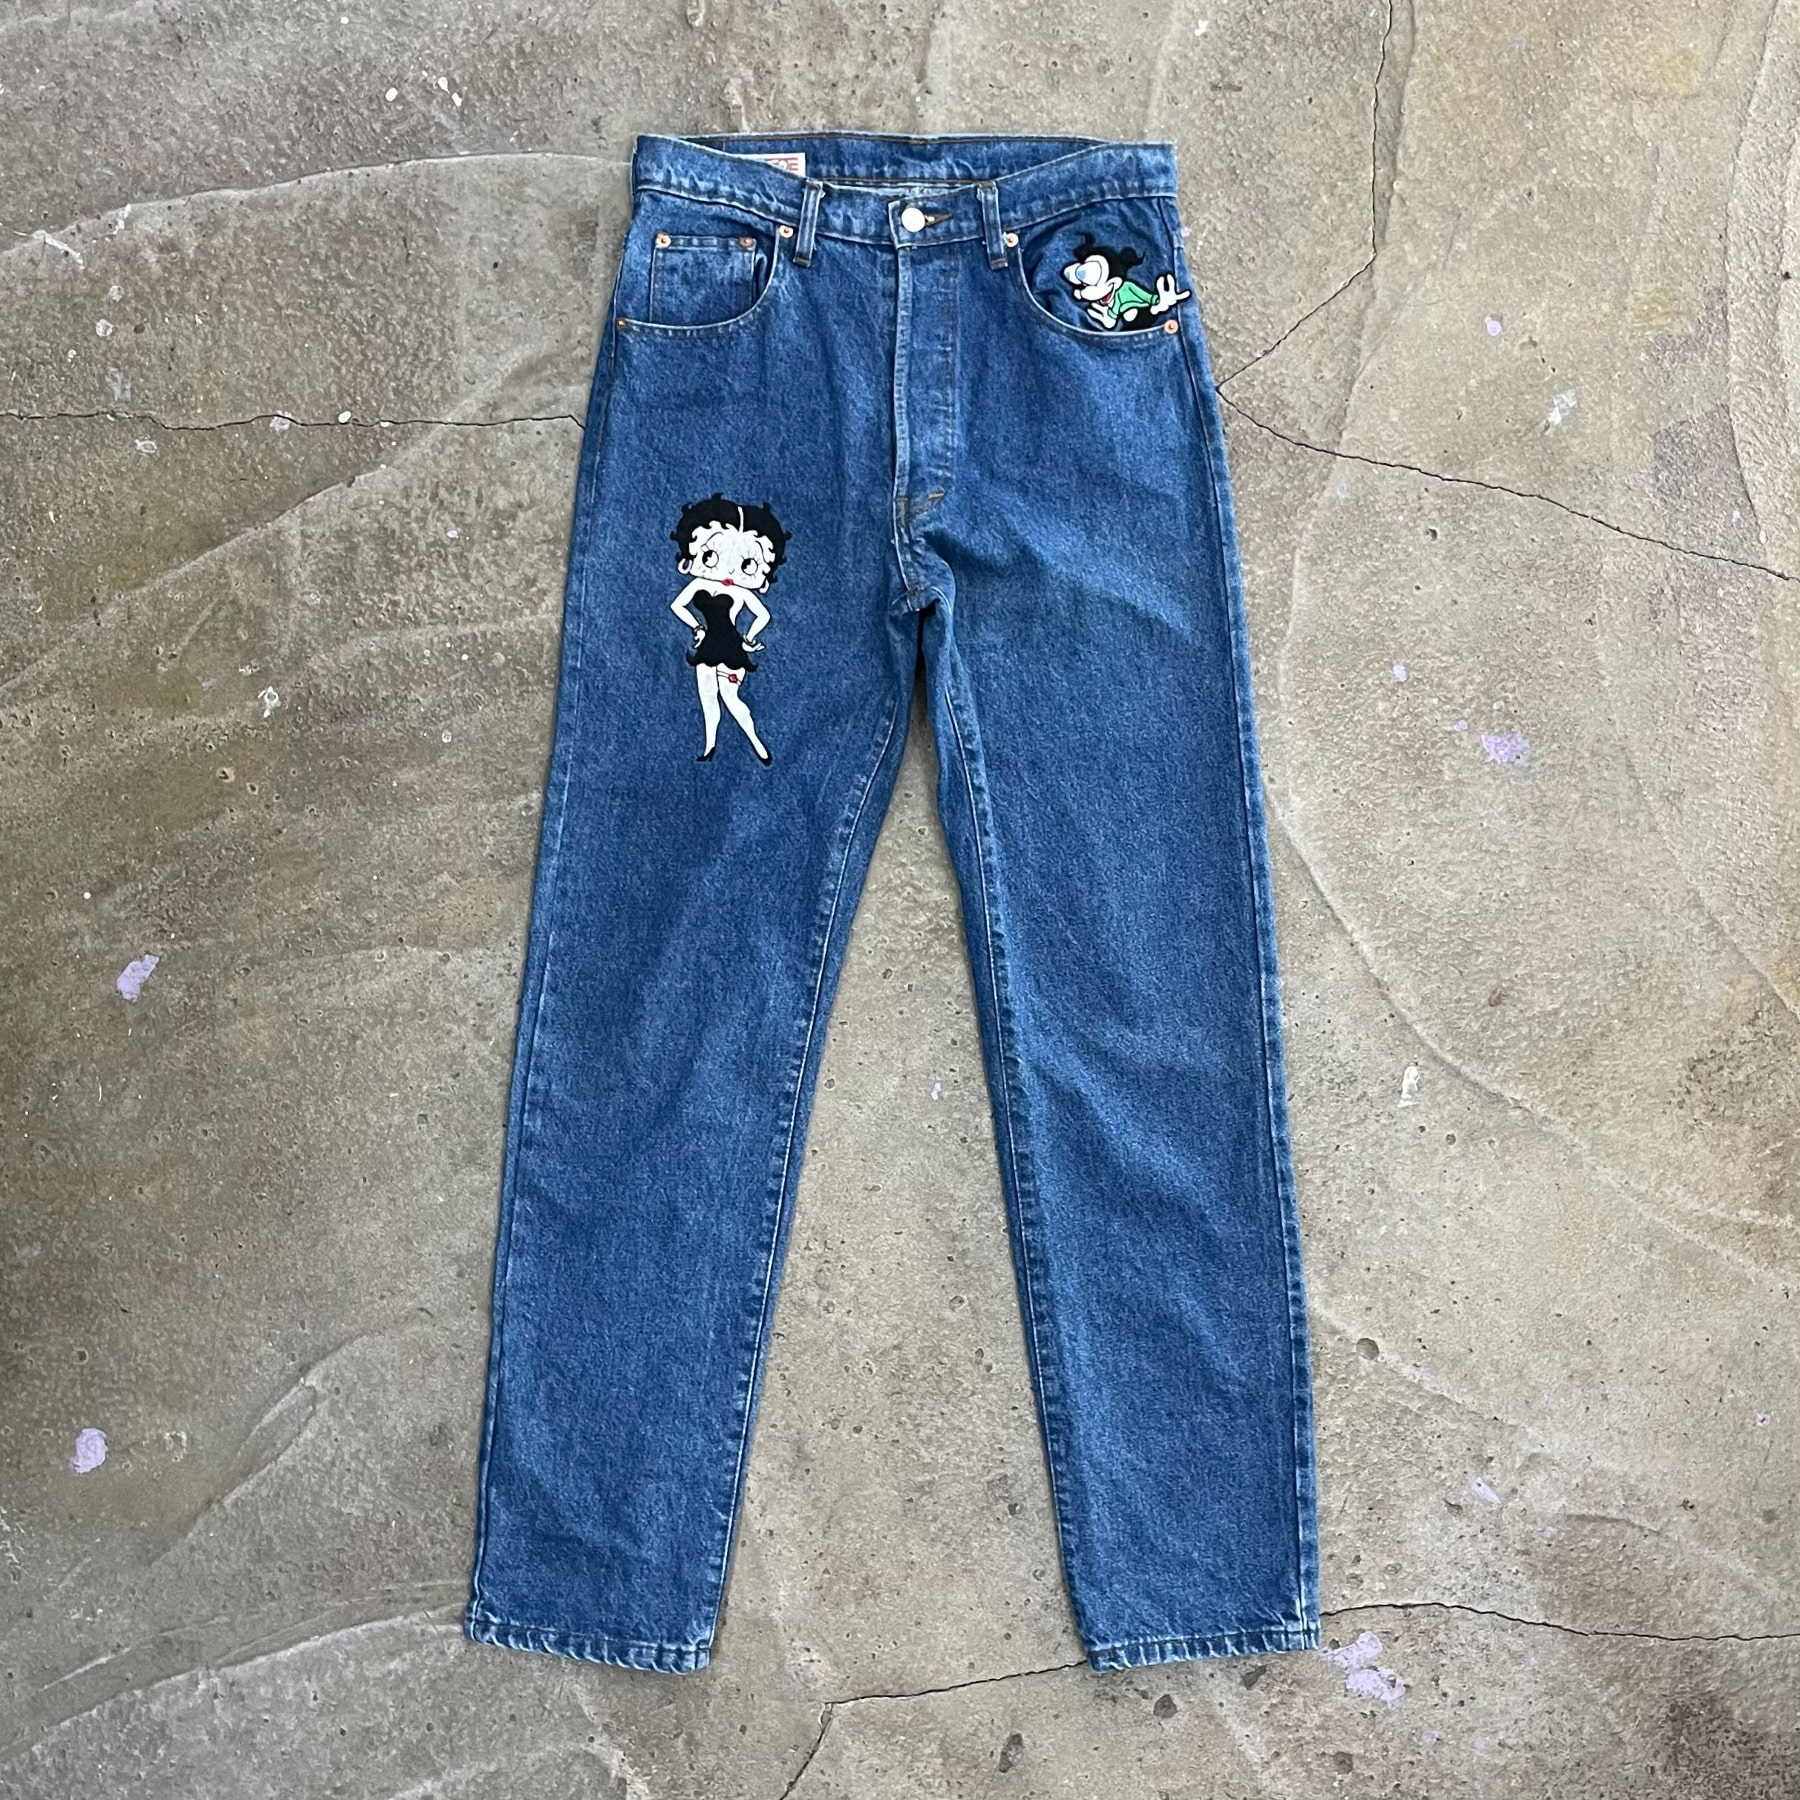 1992 Too Cute Betty Boop Jeans (Made in USA) - S (31inch)